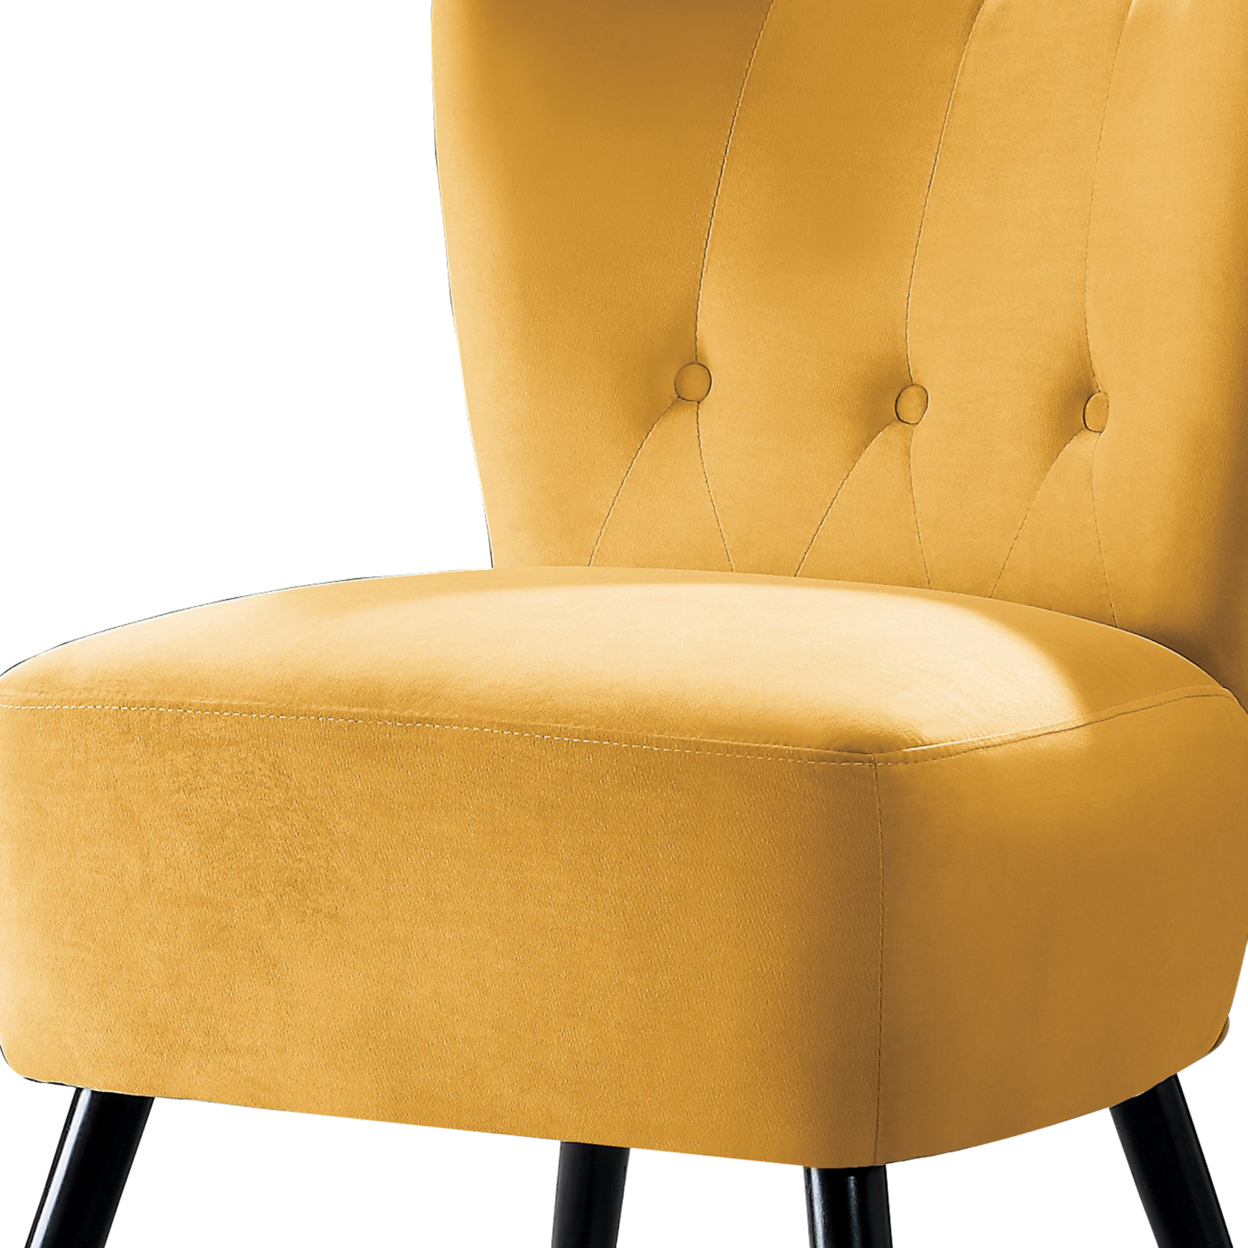 Upholstered Armless Accent Chair With Flared Back And Button Tufting, Yellow- Saltoro Sherpi